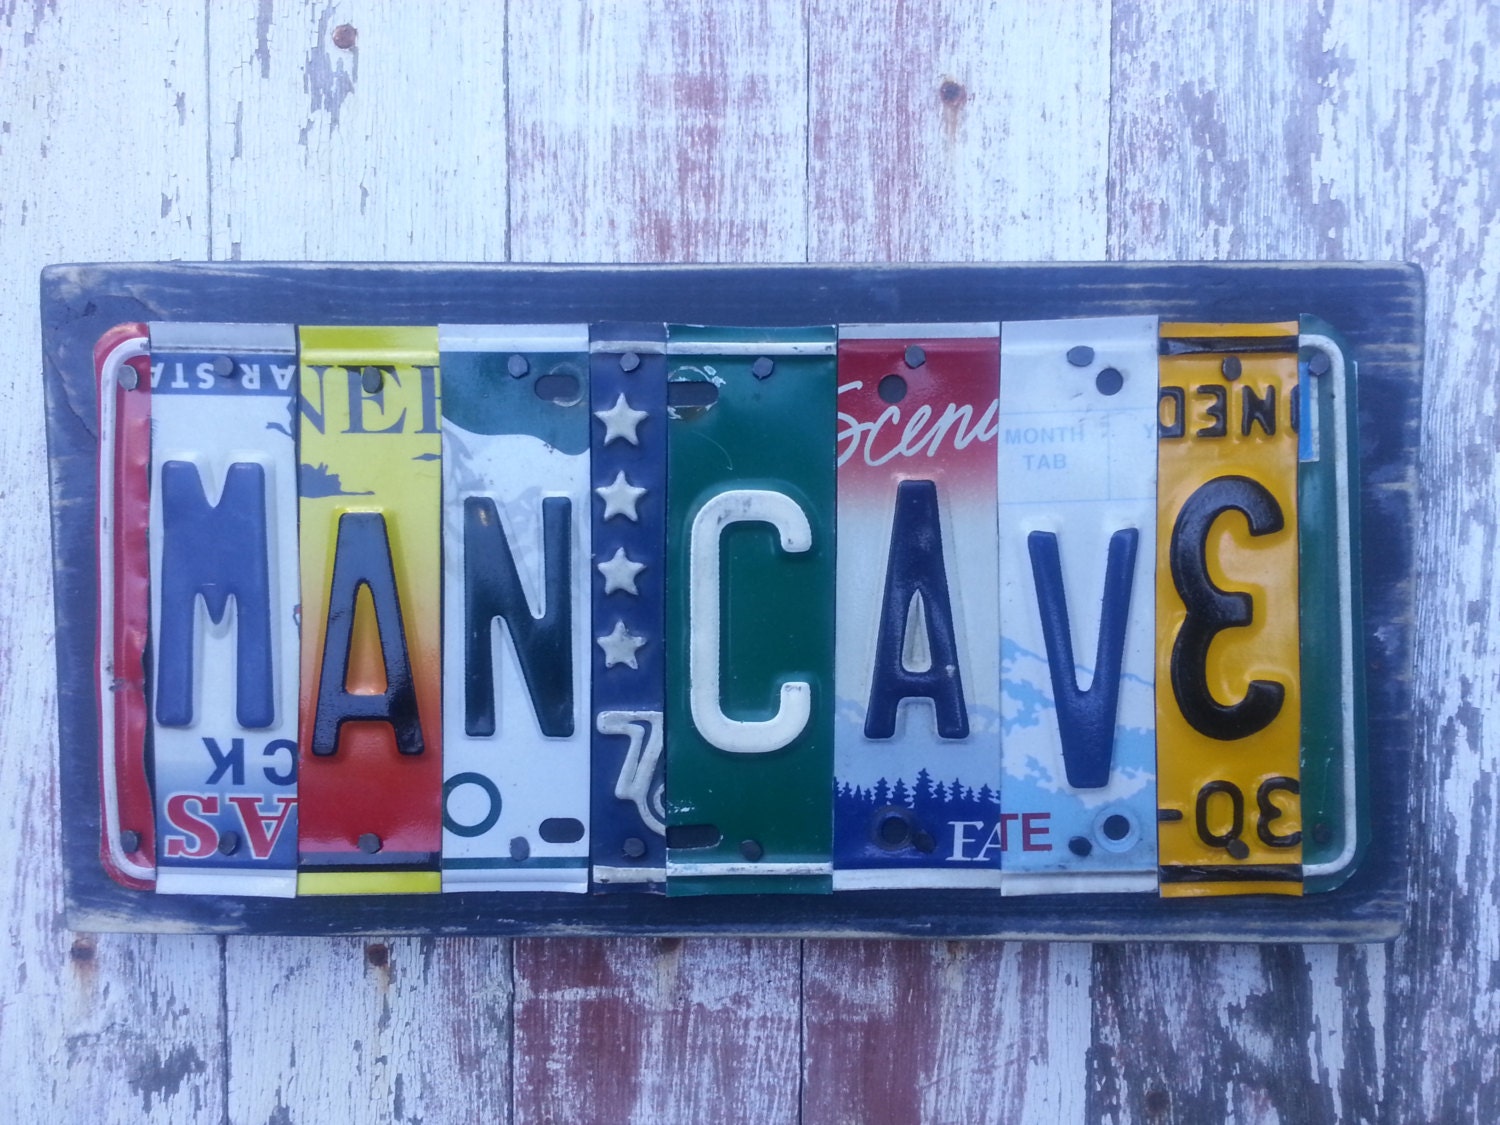 man-cave-7-letter-license-plate-sign-name-by-recycledartco-on-etsy